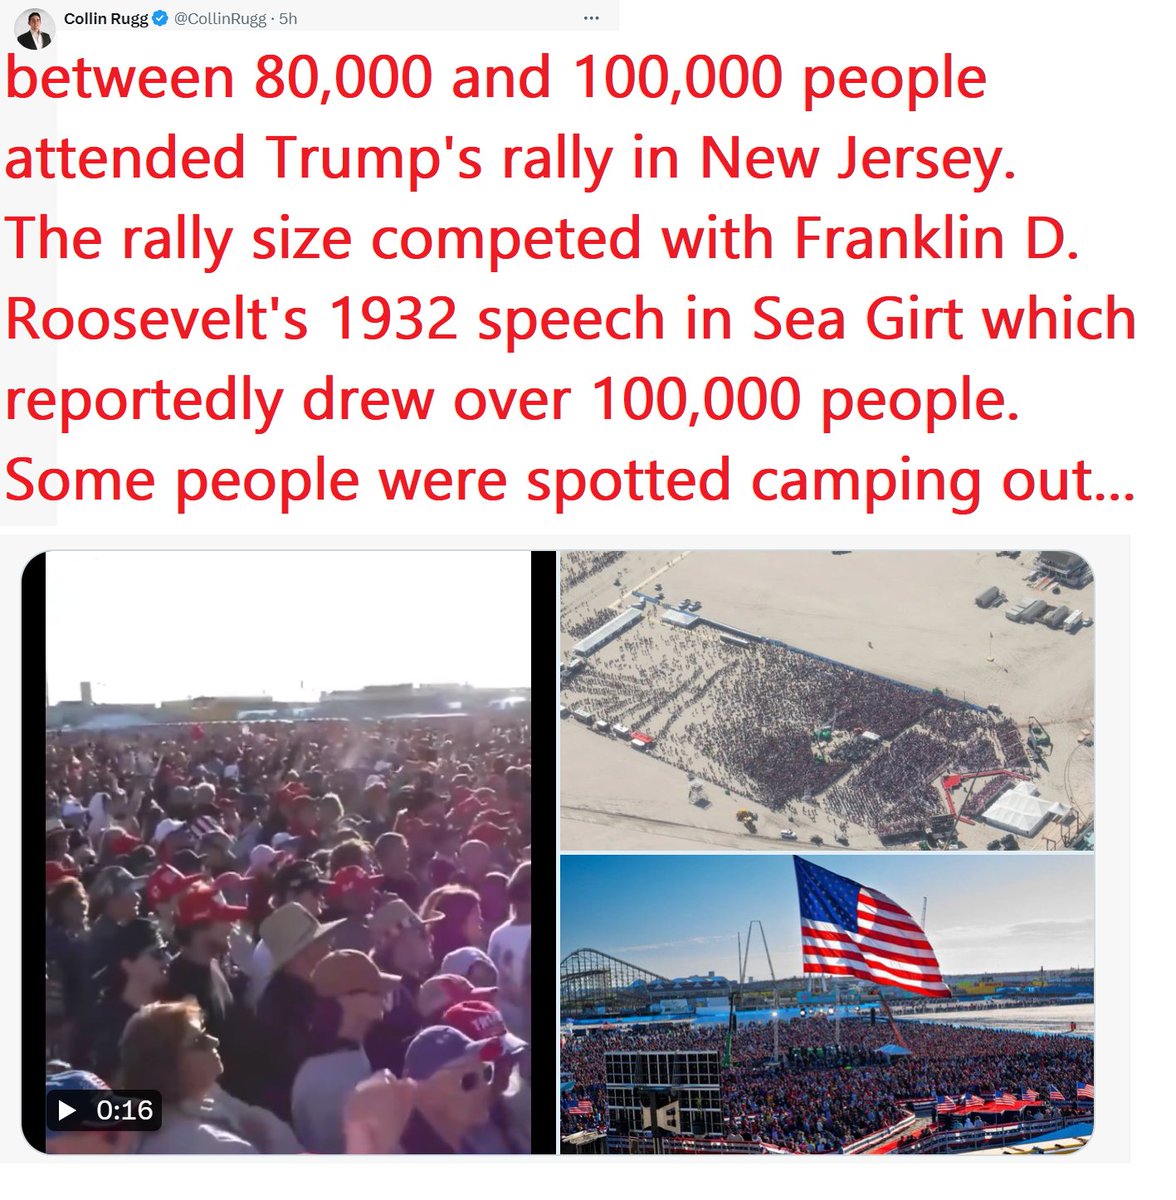 🇺🇸❤️PATRIOT FOLLOW TRAIN❤️🇺🇸 🇺🇸❤️HAPPY MOTHER'S DAY EVENING !❤️🇺🇸 🇺🇸❤️DROP YOUR HANDLES ❤️🇺🇸 🇺🇸❤️FOLLOW OTHER PATRIOTS❤️🇺🇸 🔥❤️LIKE & RETWEET IFBAP❤️🔥 🇺🇸❤️PRAY FOR TRUMP❤️🇺🇸 REPORT: Wildwood officials estimate that between 80,000 and 100,000 people attended Trump's rally